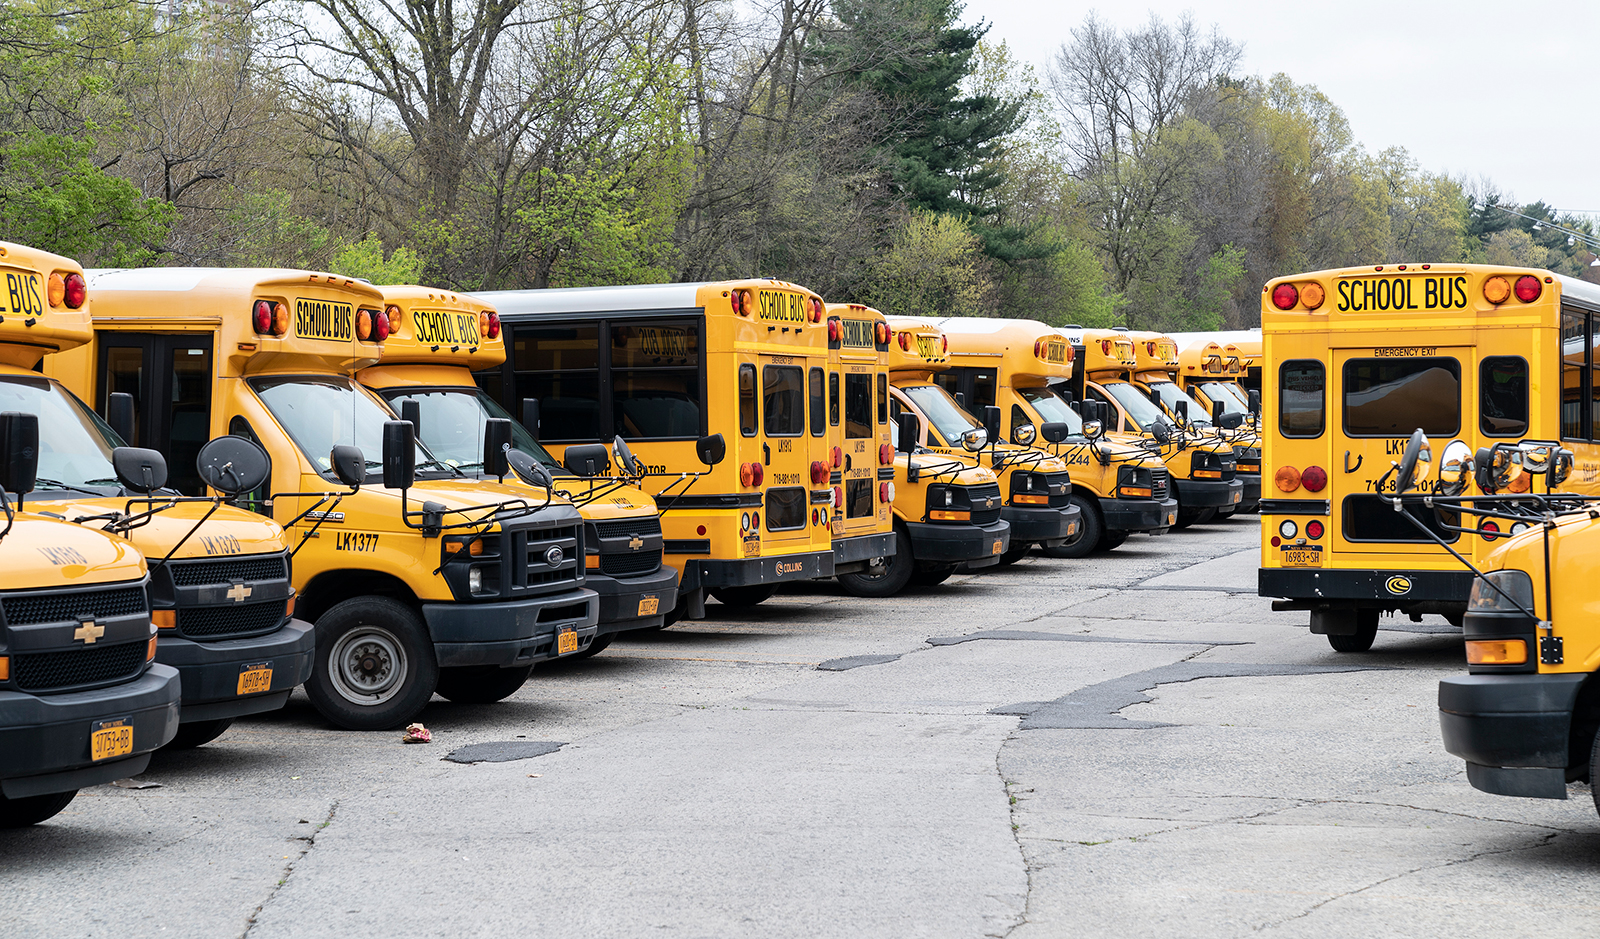 School buses stand idle on the parking lot of the Bronx borough during COVID-19 pandemic as seen on Wednesday, April, 29.